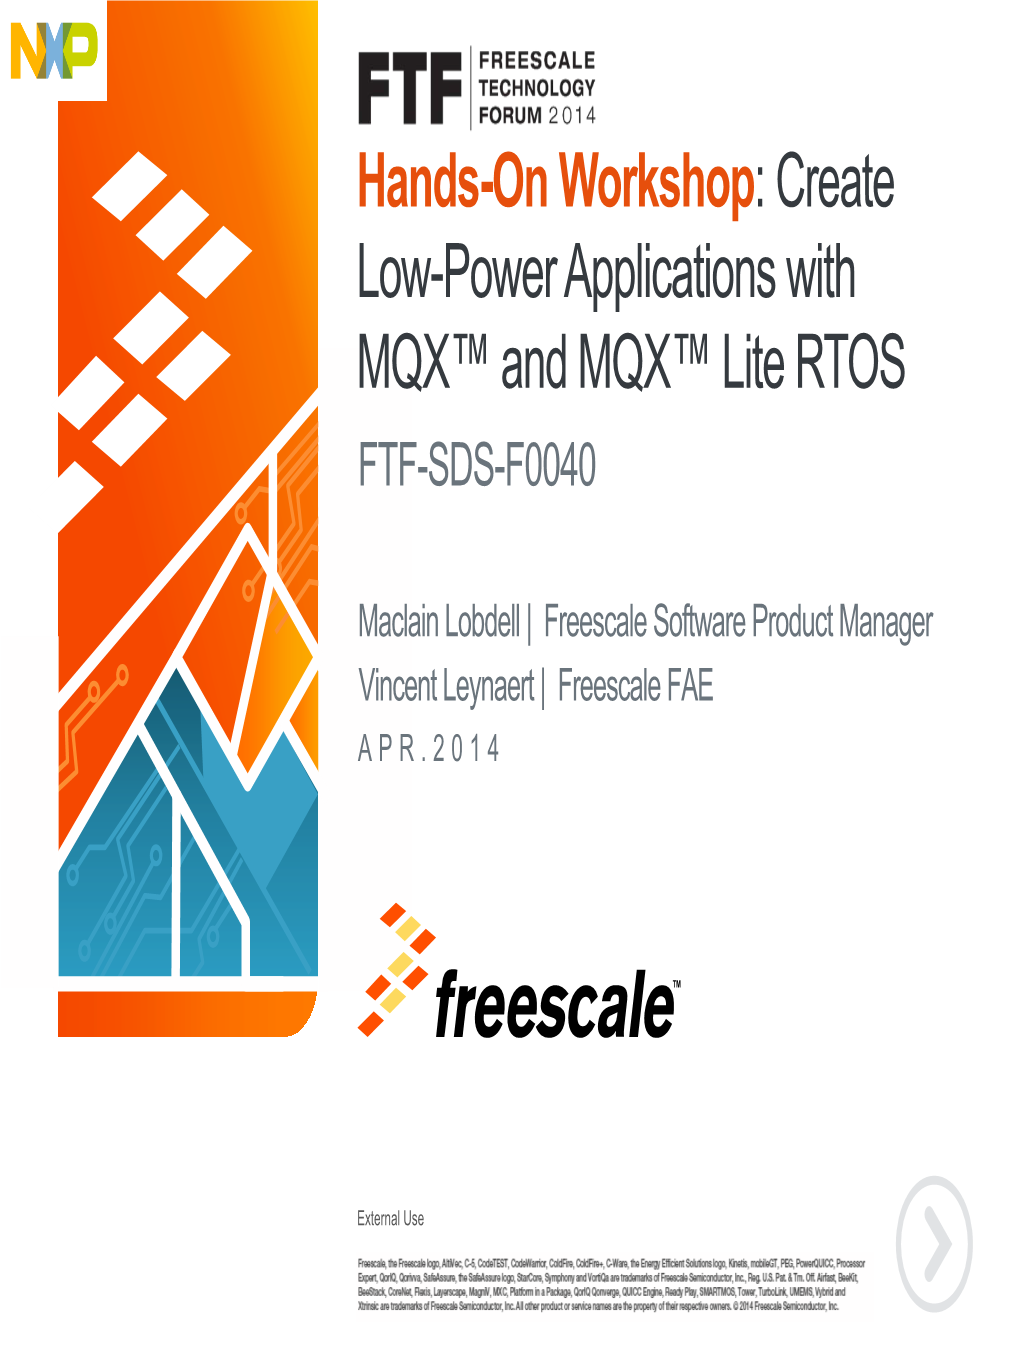 Create Low-Power Applications with MQX™ and MQX™ Lite RTOS FTF-SDS-F0040